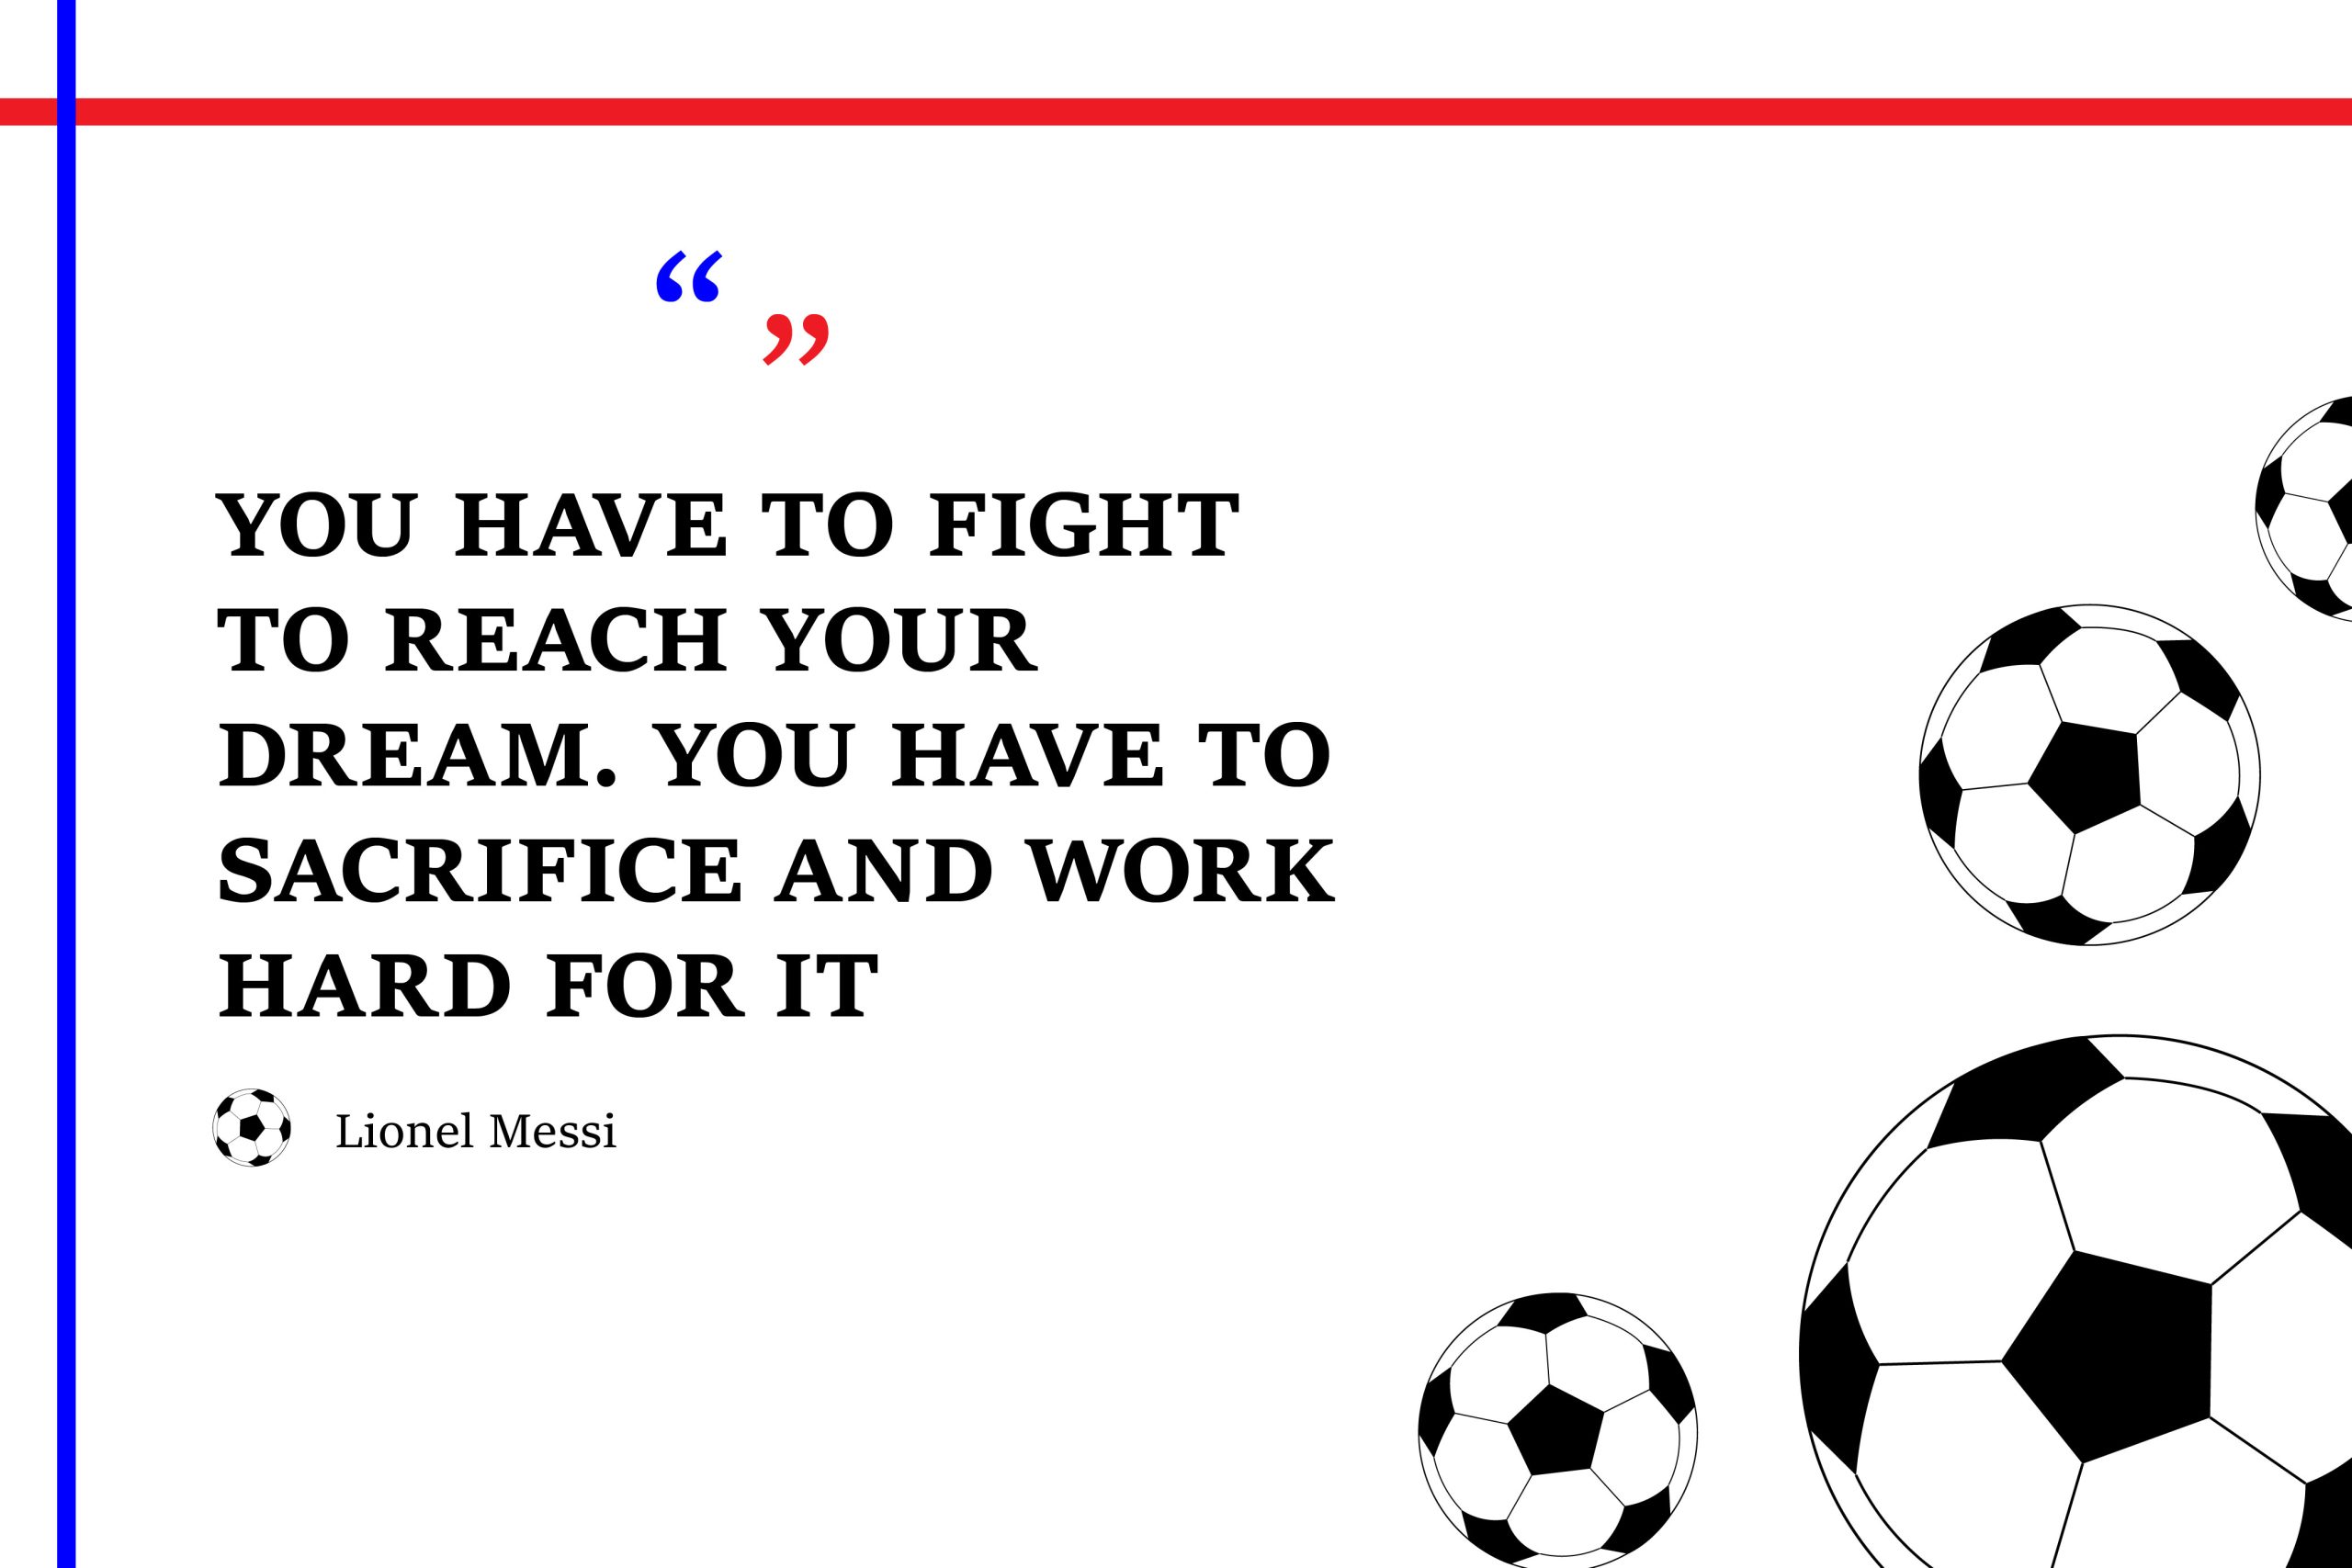 “You have to fight to reach your dream. You have to sacrifice and work hard for it" Lionel Messi